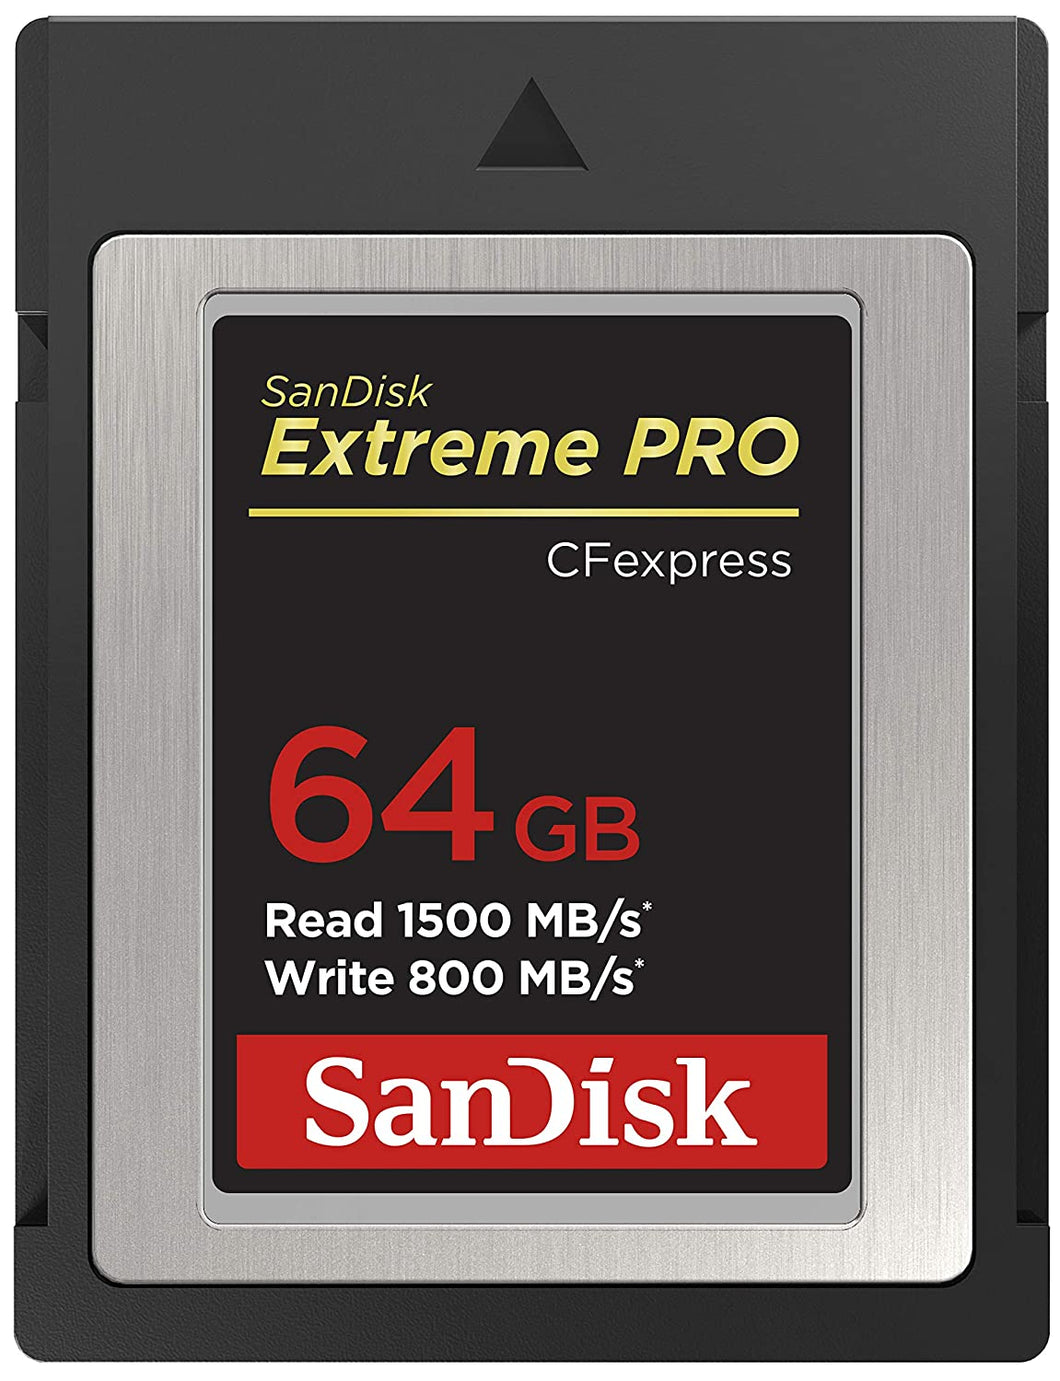 SanDisk Extreme Pro Cfexpress Type B Card,1500 MB/s R & 800 MB/s W, Black